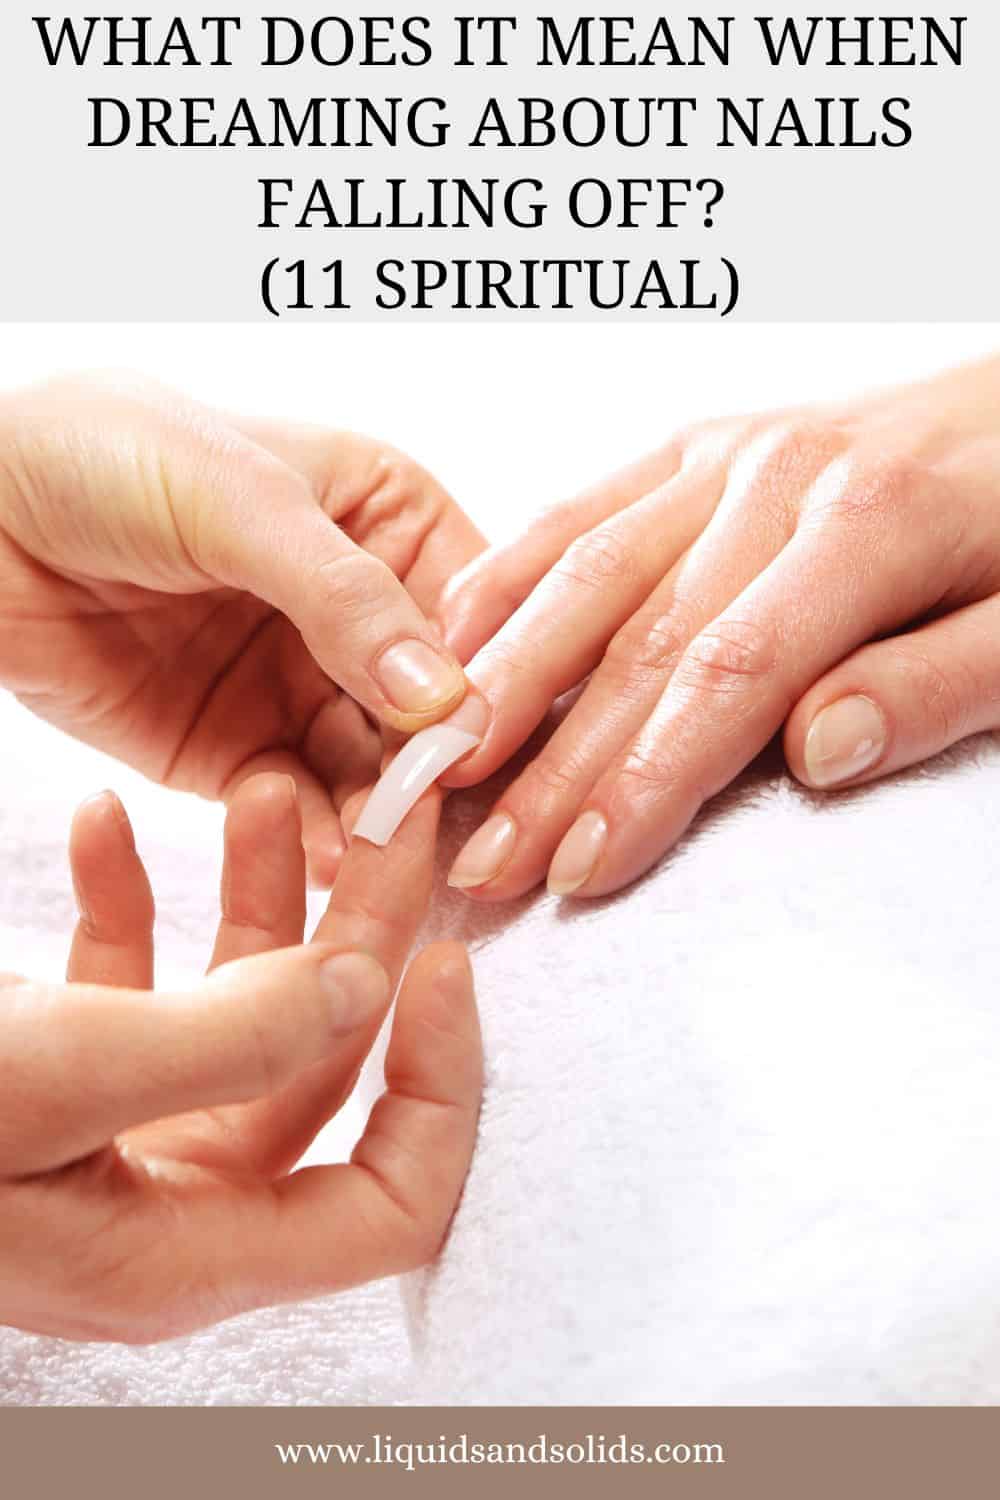 Dream About Nails Falling Off? (11 Spiritual Meanings)